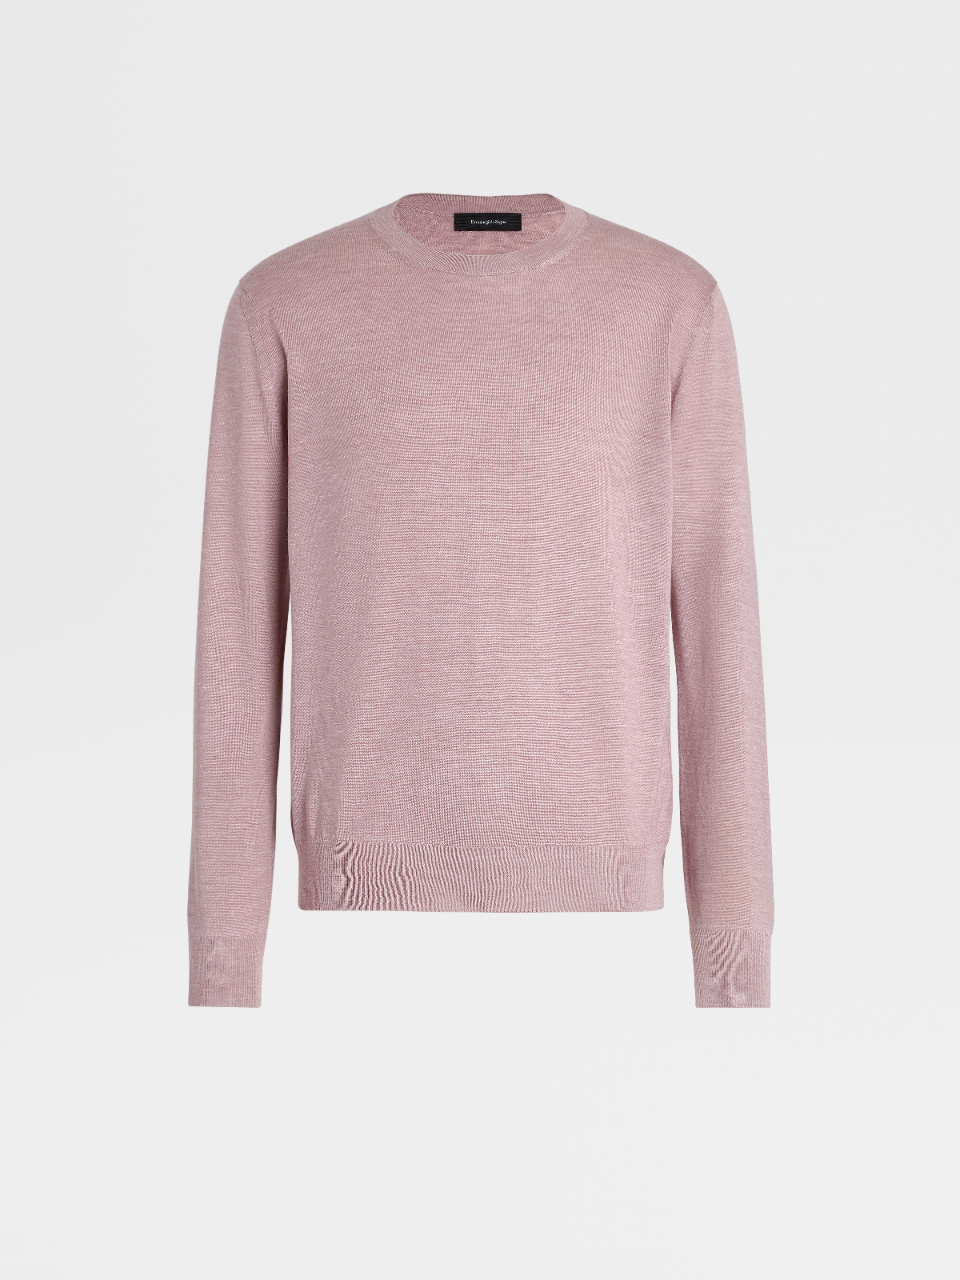 Red Faded Silk Cashmere and Line Knit Crewneck